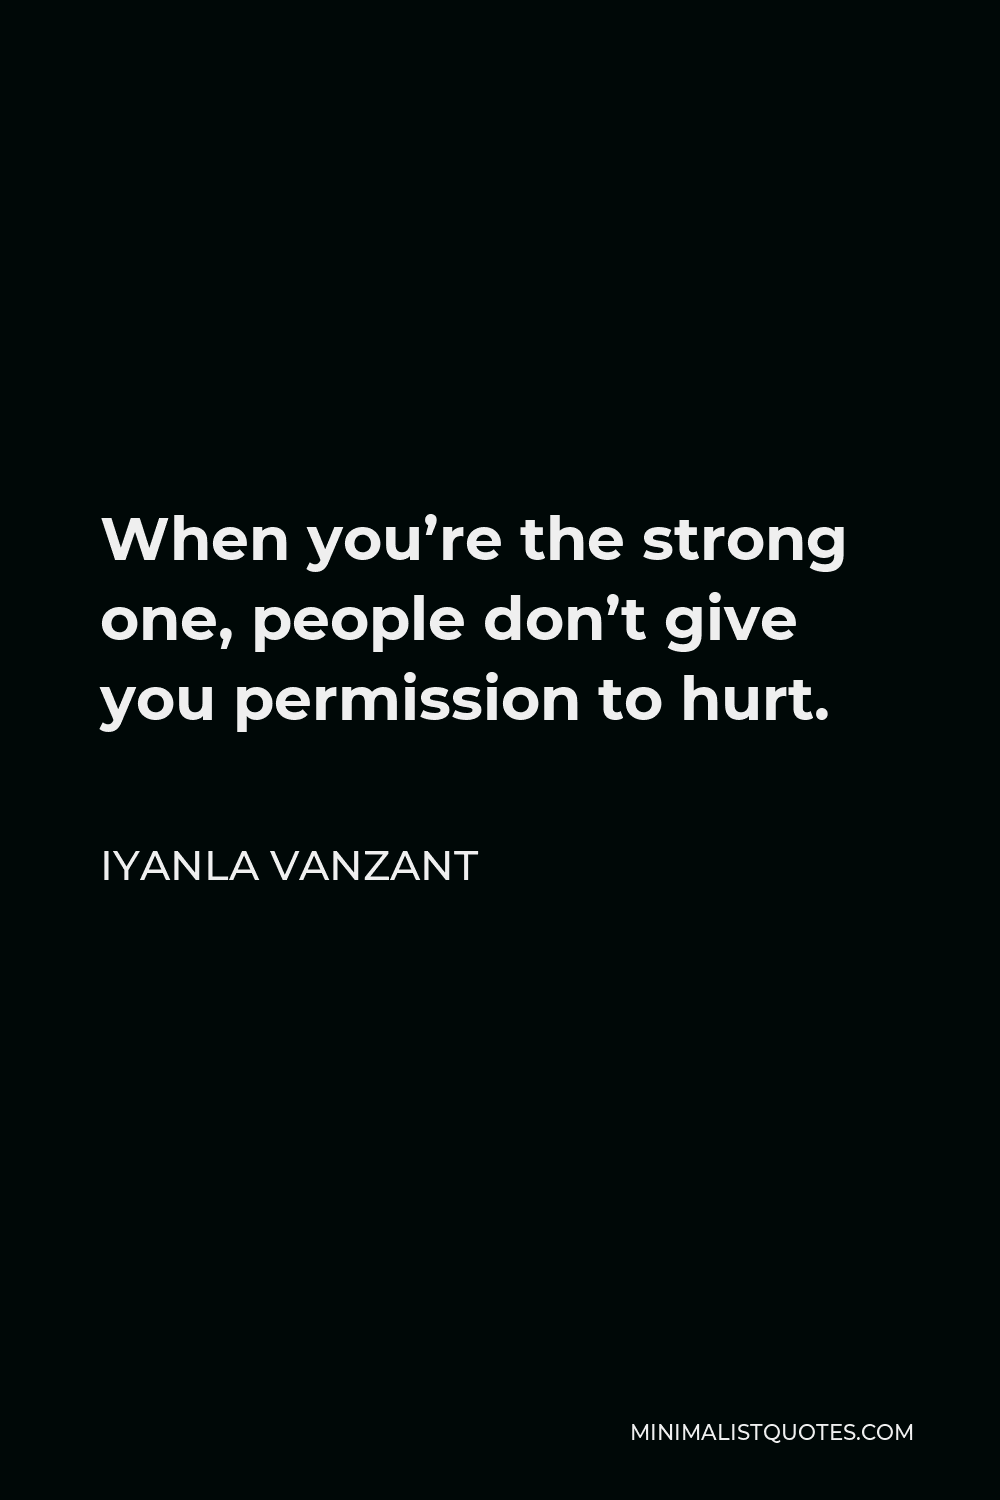 Iyanla Vanzant Quote - When you’re the strong one, people don’t give you permission to hurt.